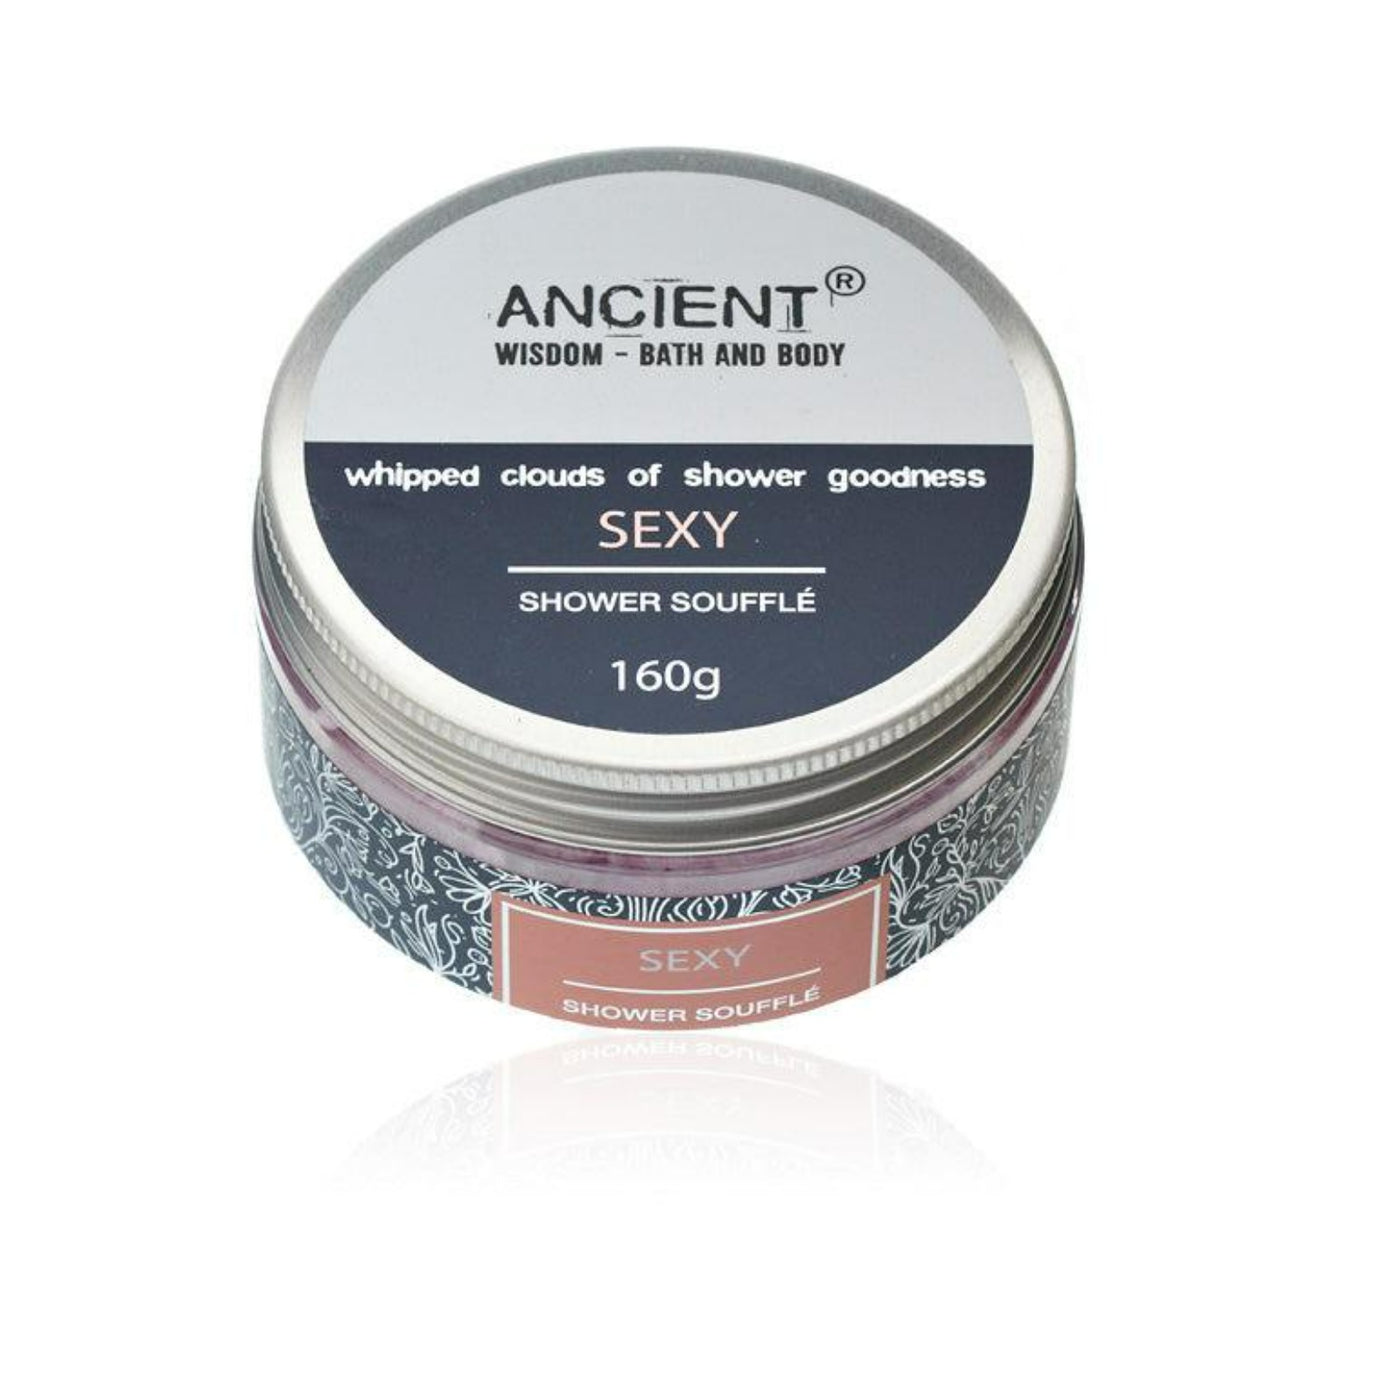 Body Cleansing Shower Souffle 160g - Sexy.